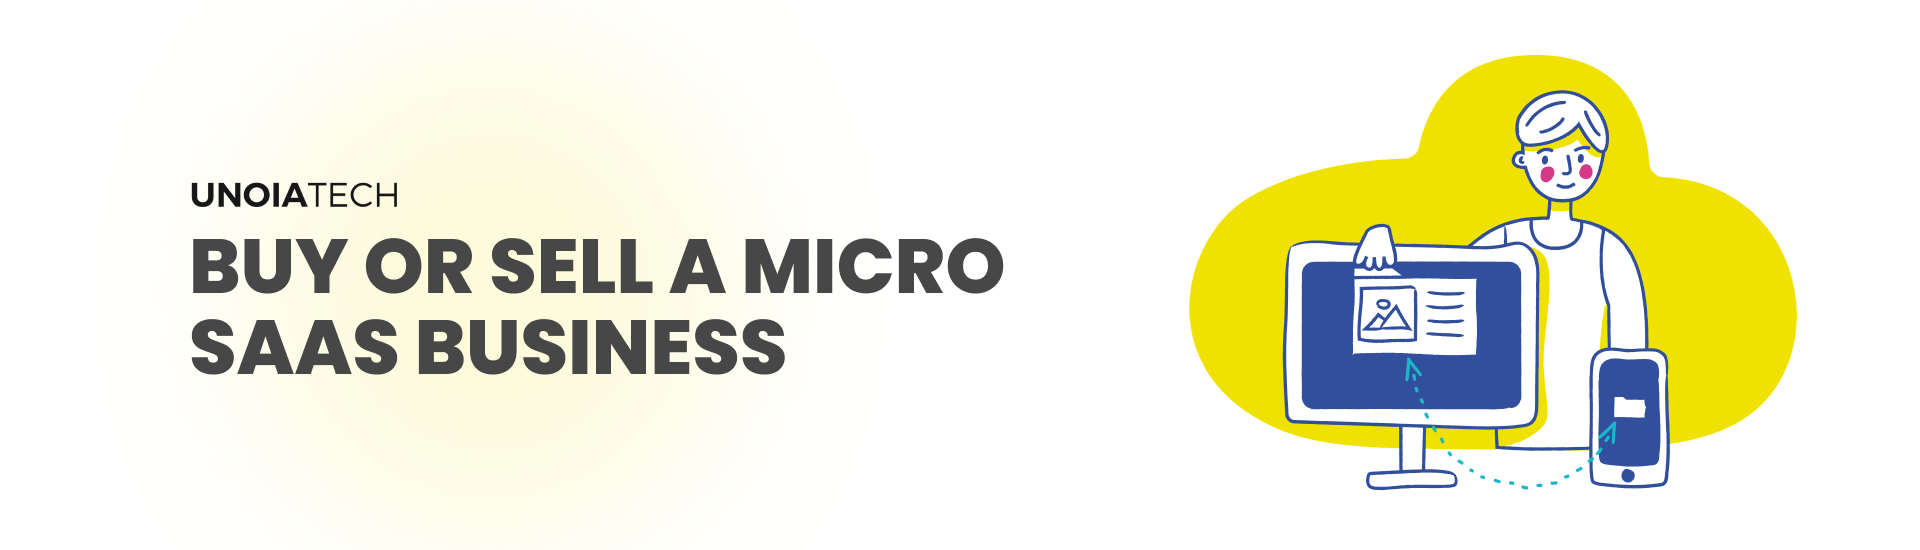 BUY OR SELL A MICRO SAAS BUSINESS